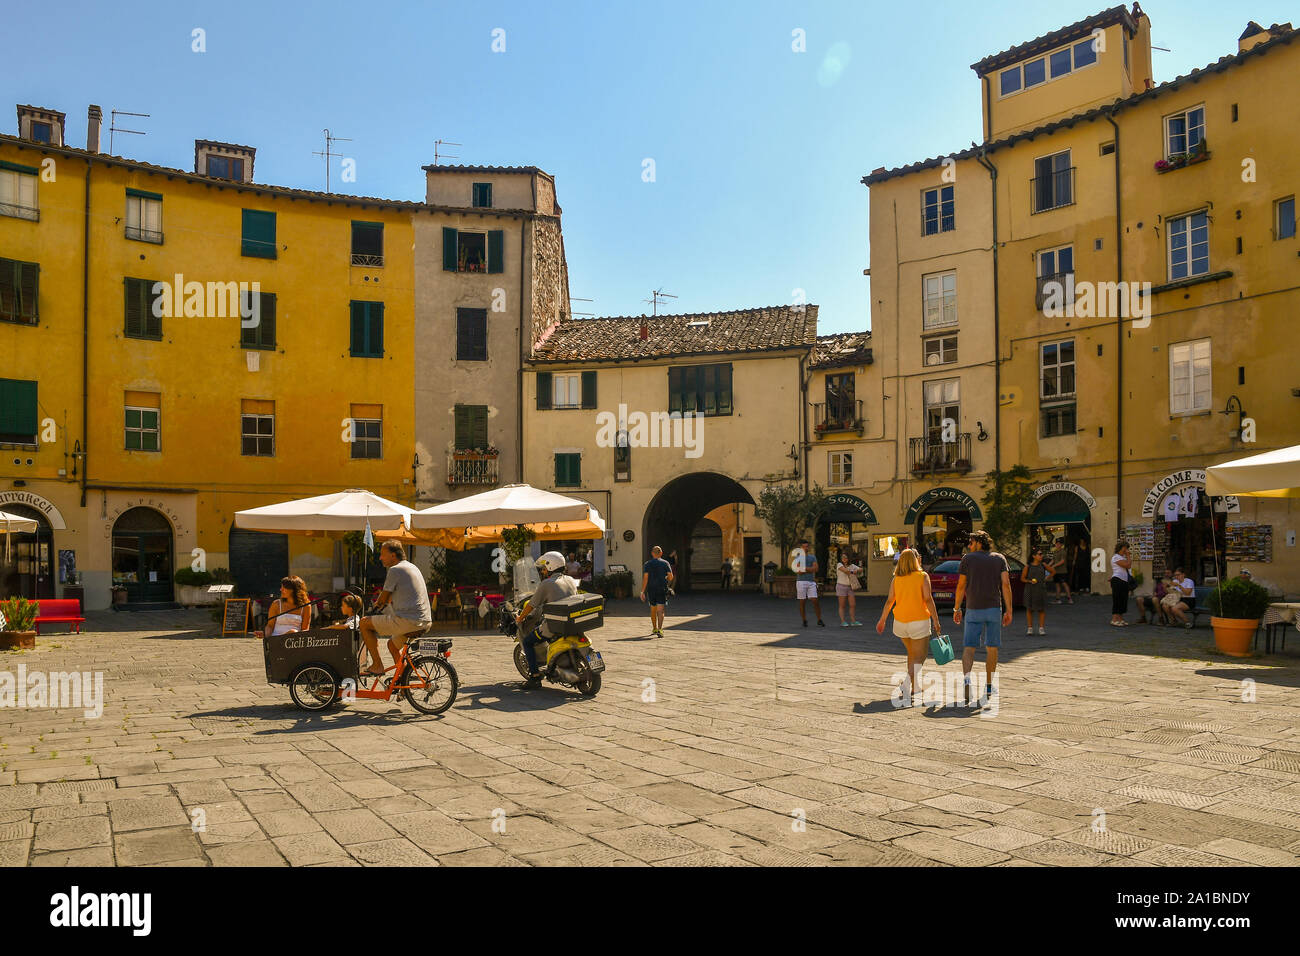 Piazza dell'Anfiteatro, a famous elliptical square in Lucca, with tourists, a family on a cargo bike and a postman on a scooter, Tuscany, Italy Stock Photo